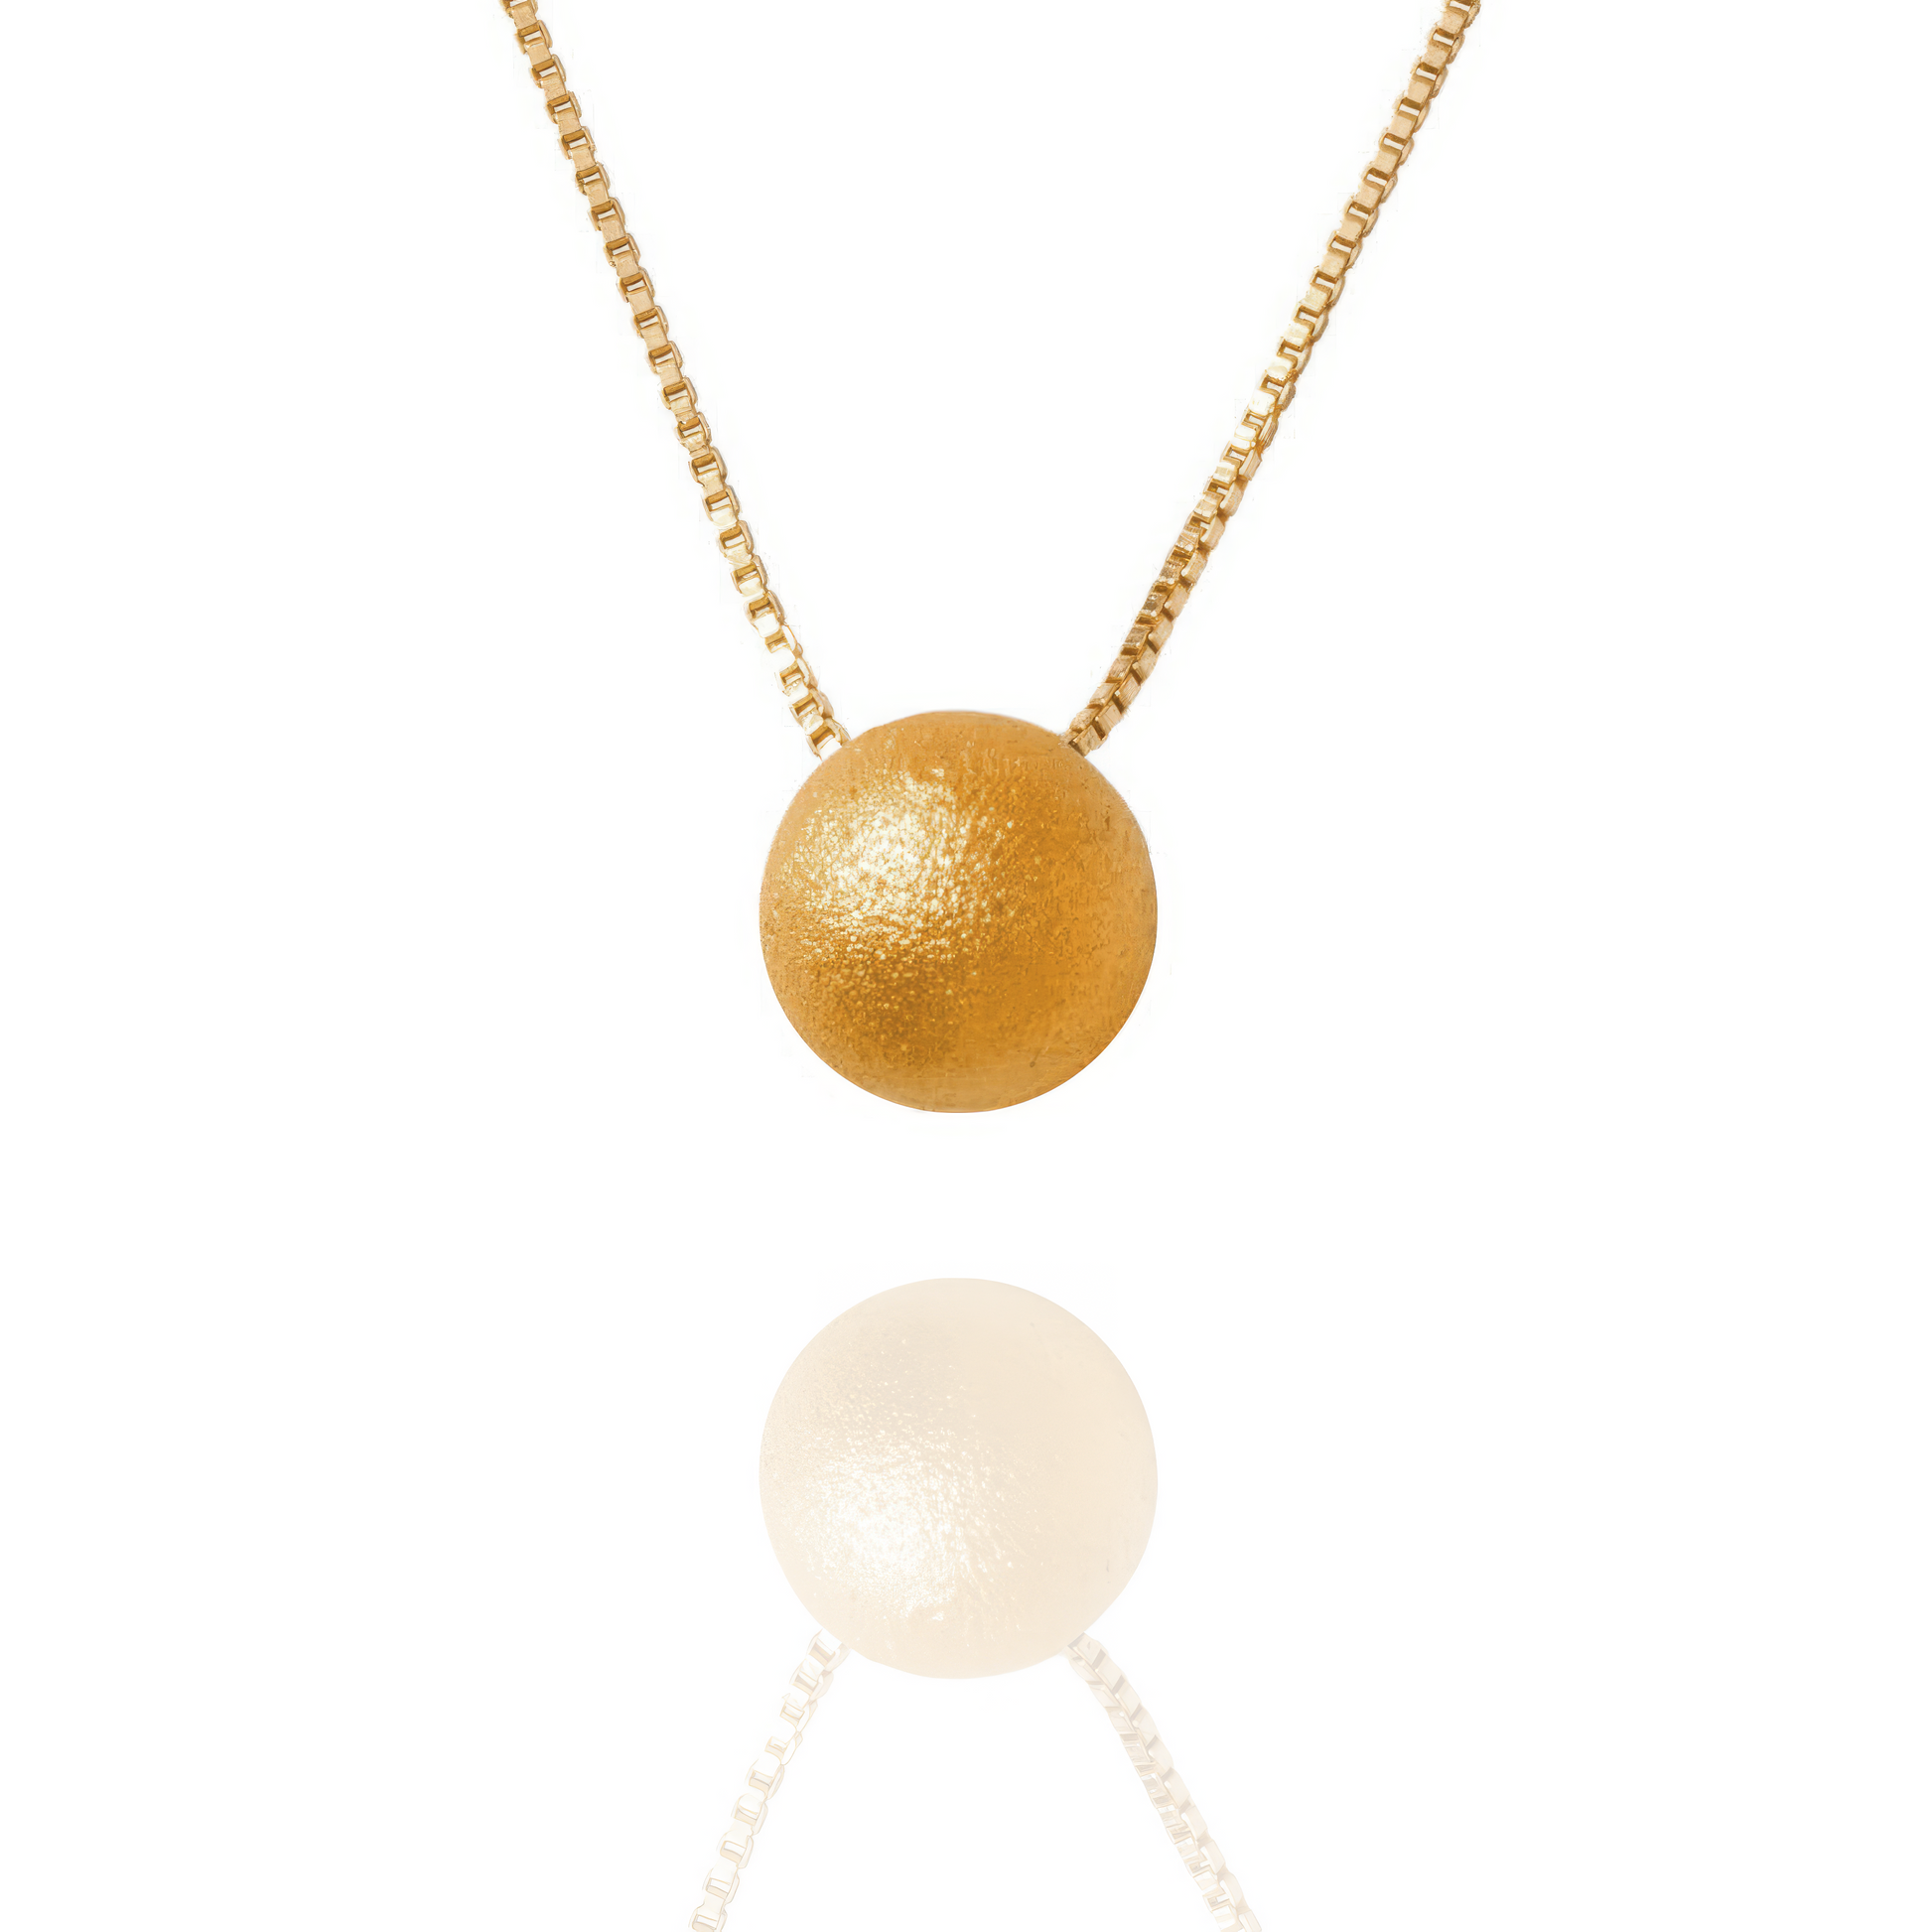 Gold Alloy Soul Sphere Necklace white background close-up